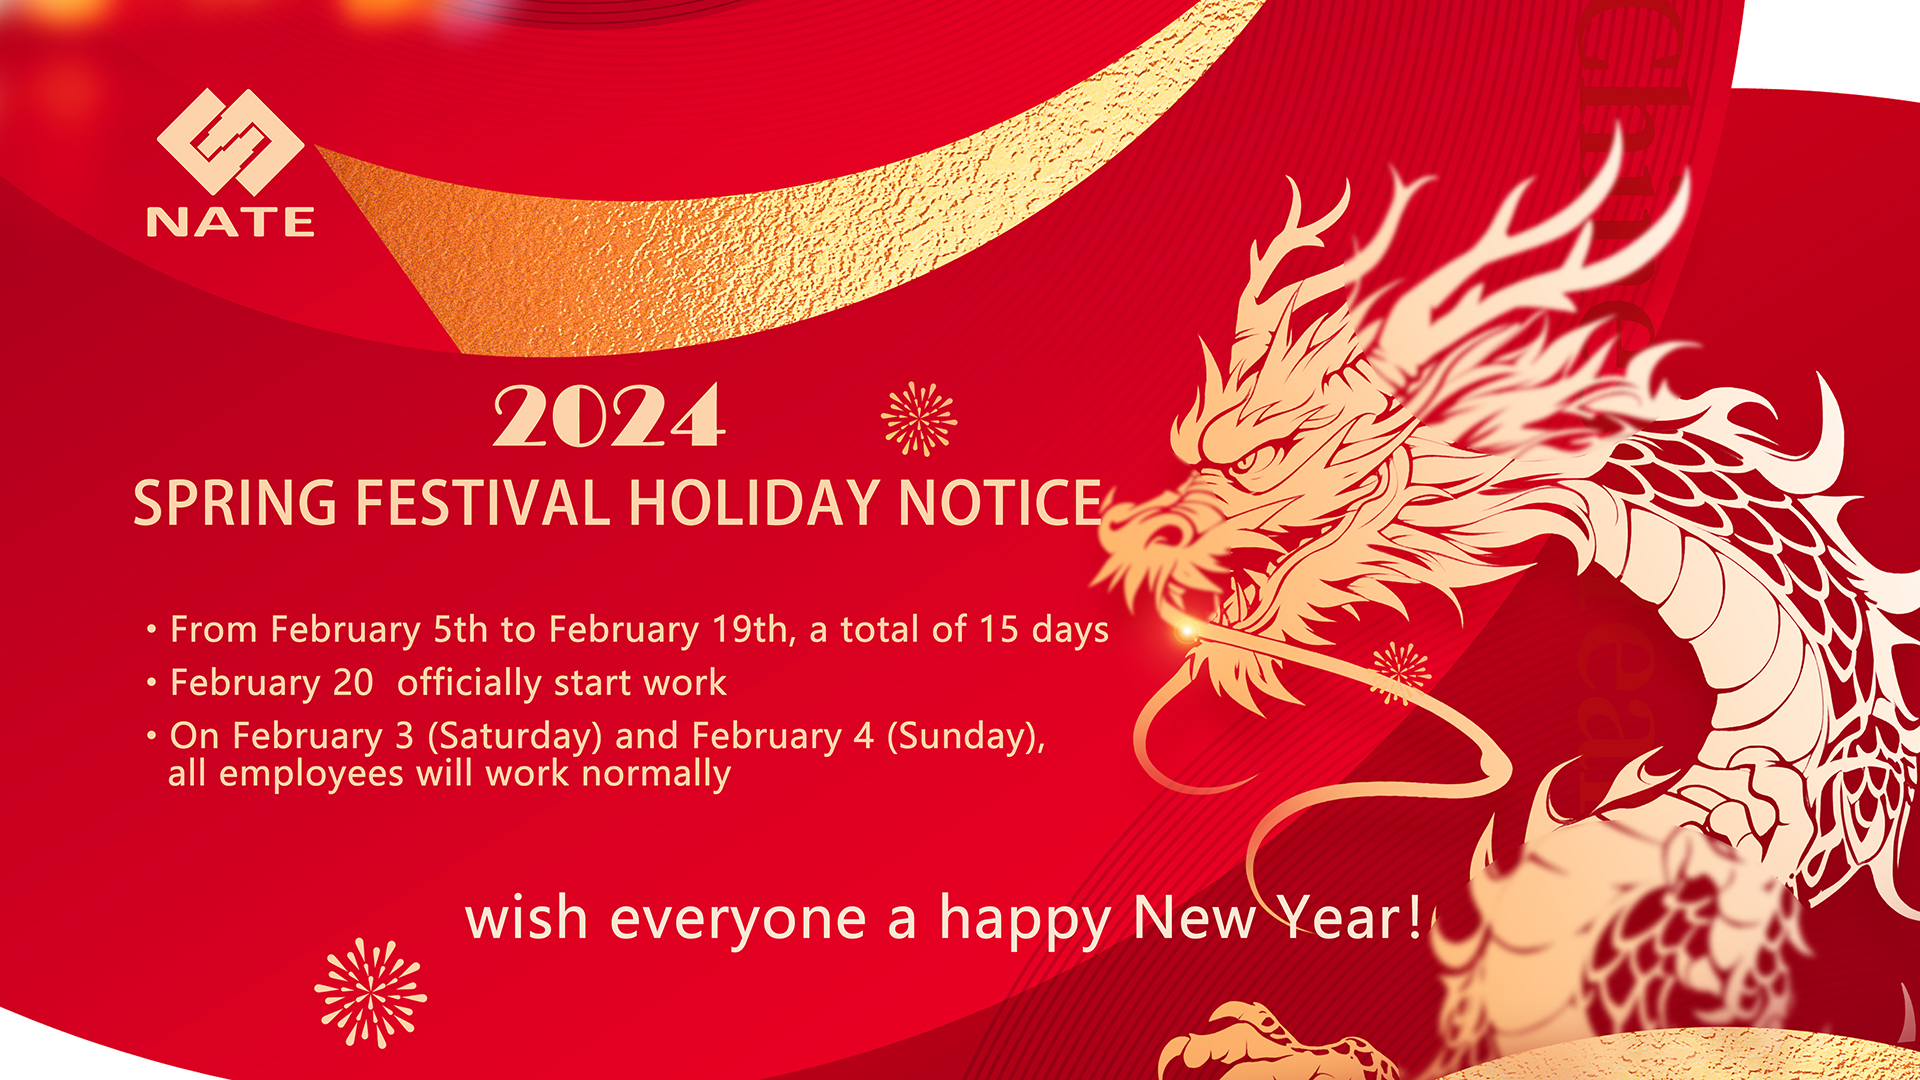 Notice of Spring Festival Holiday From Nate